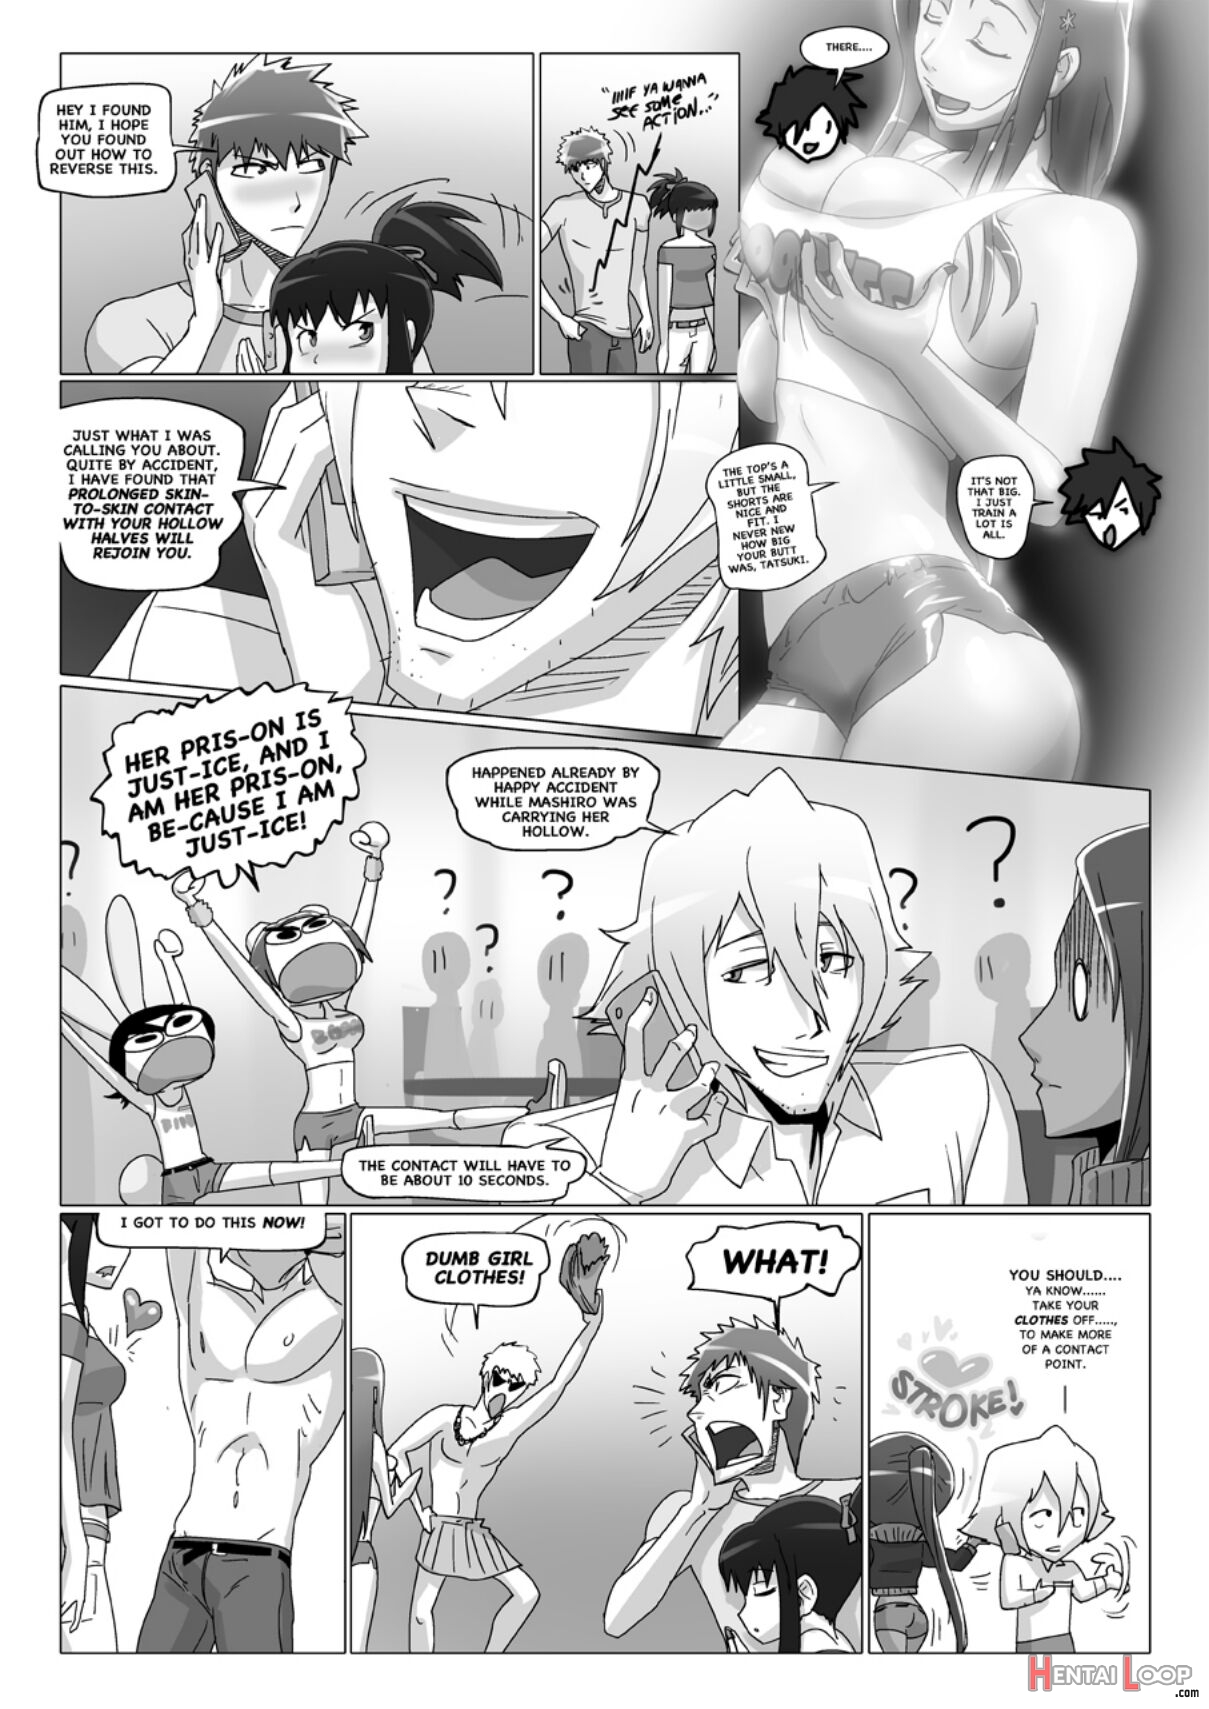 Happy To Serve You - Xxx Version page 272